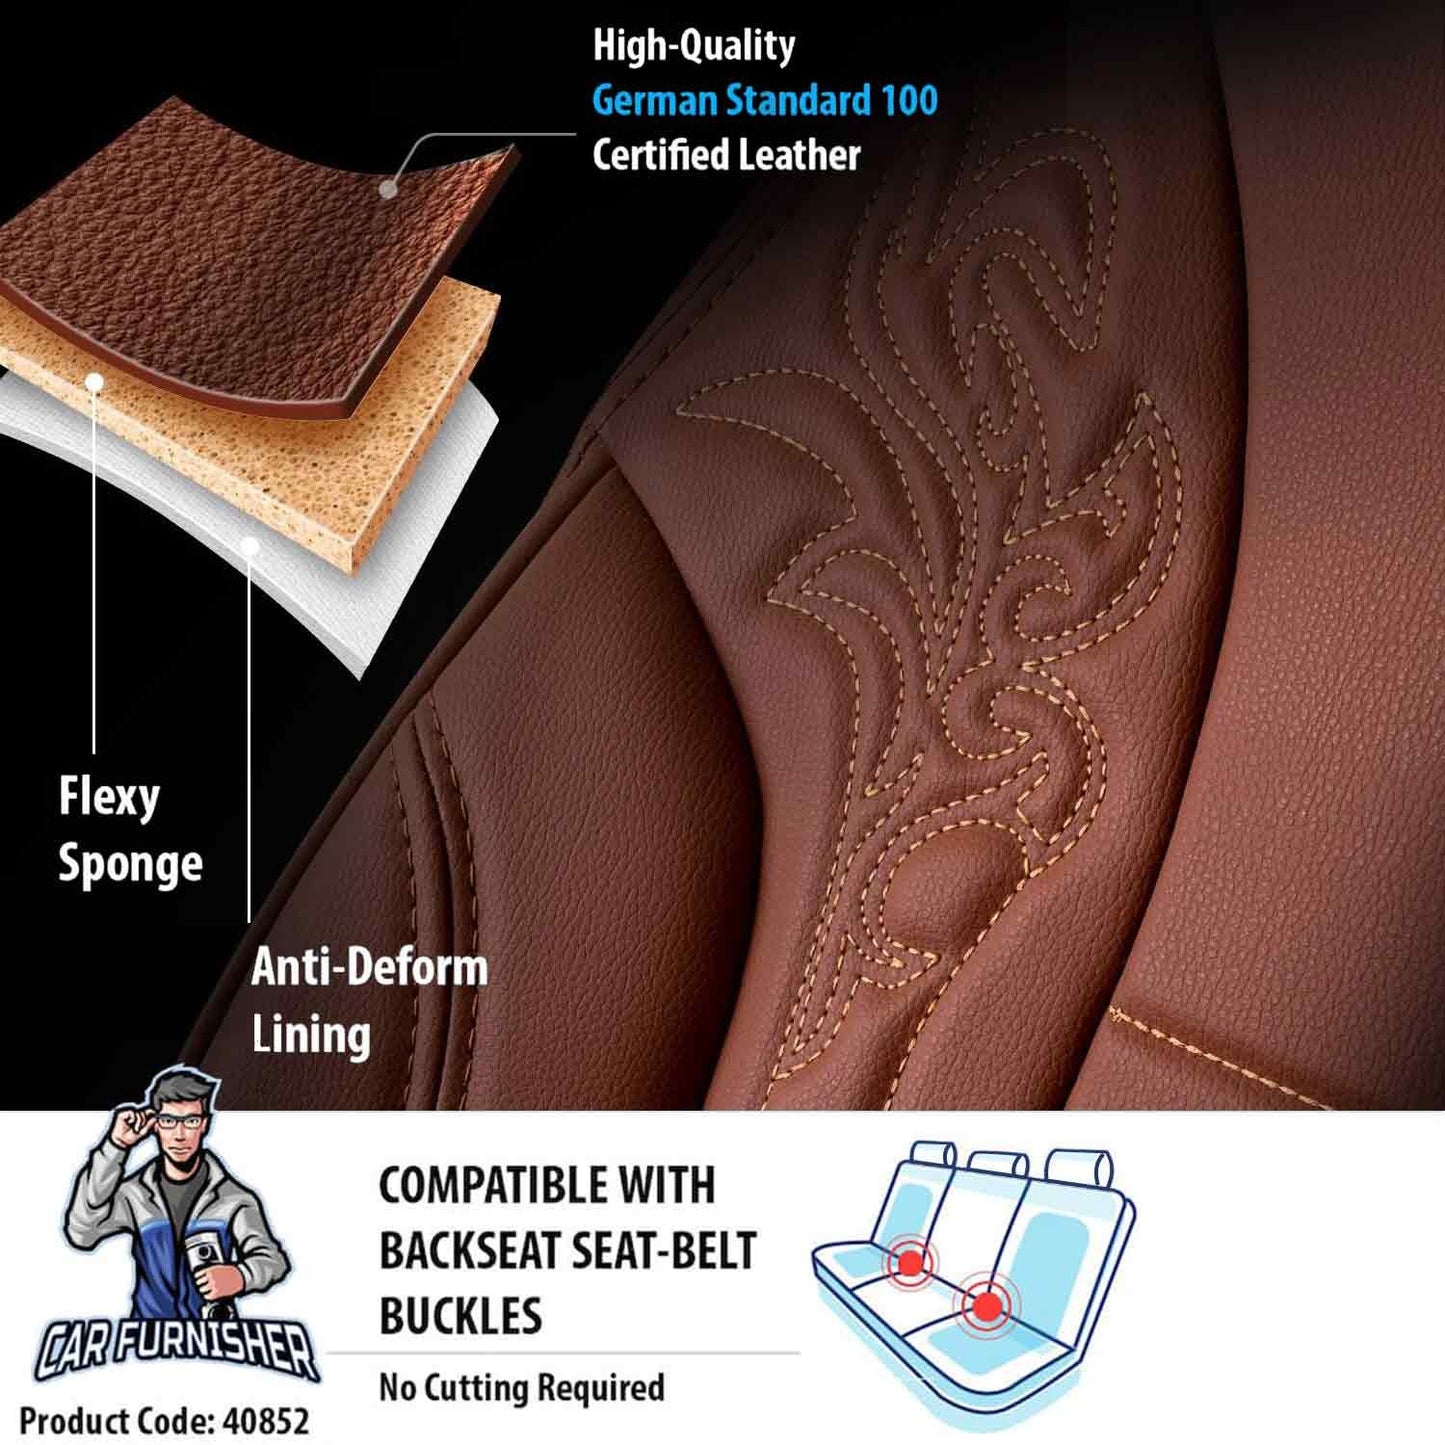 Luxury Car Seat Cover Set (5 Colors) | Tokyo Series Tan-Snuff Full Leather